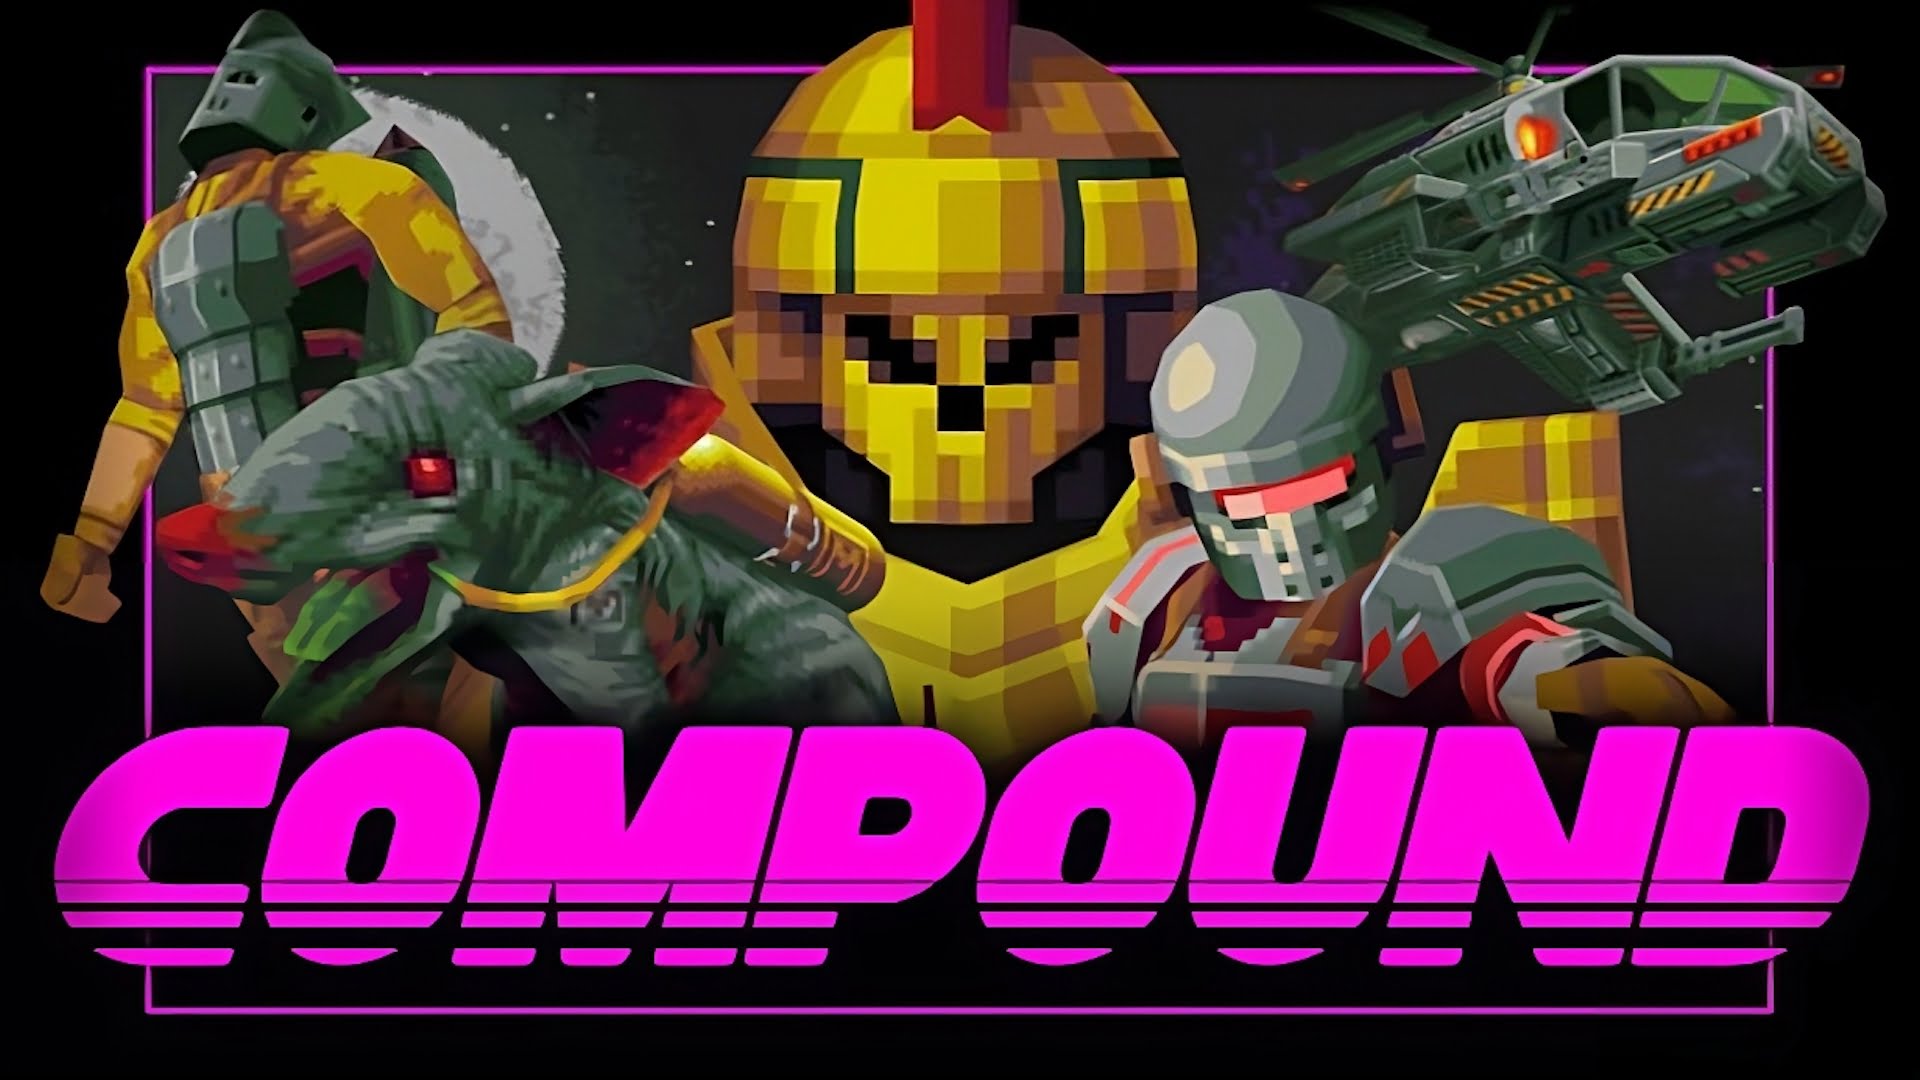 Compound is the most fun I ever had in a VR shooter